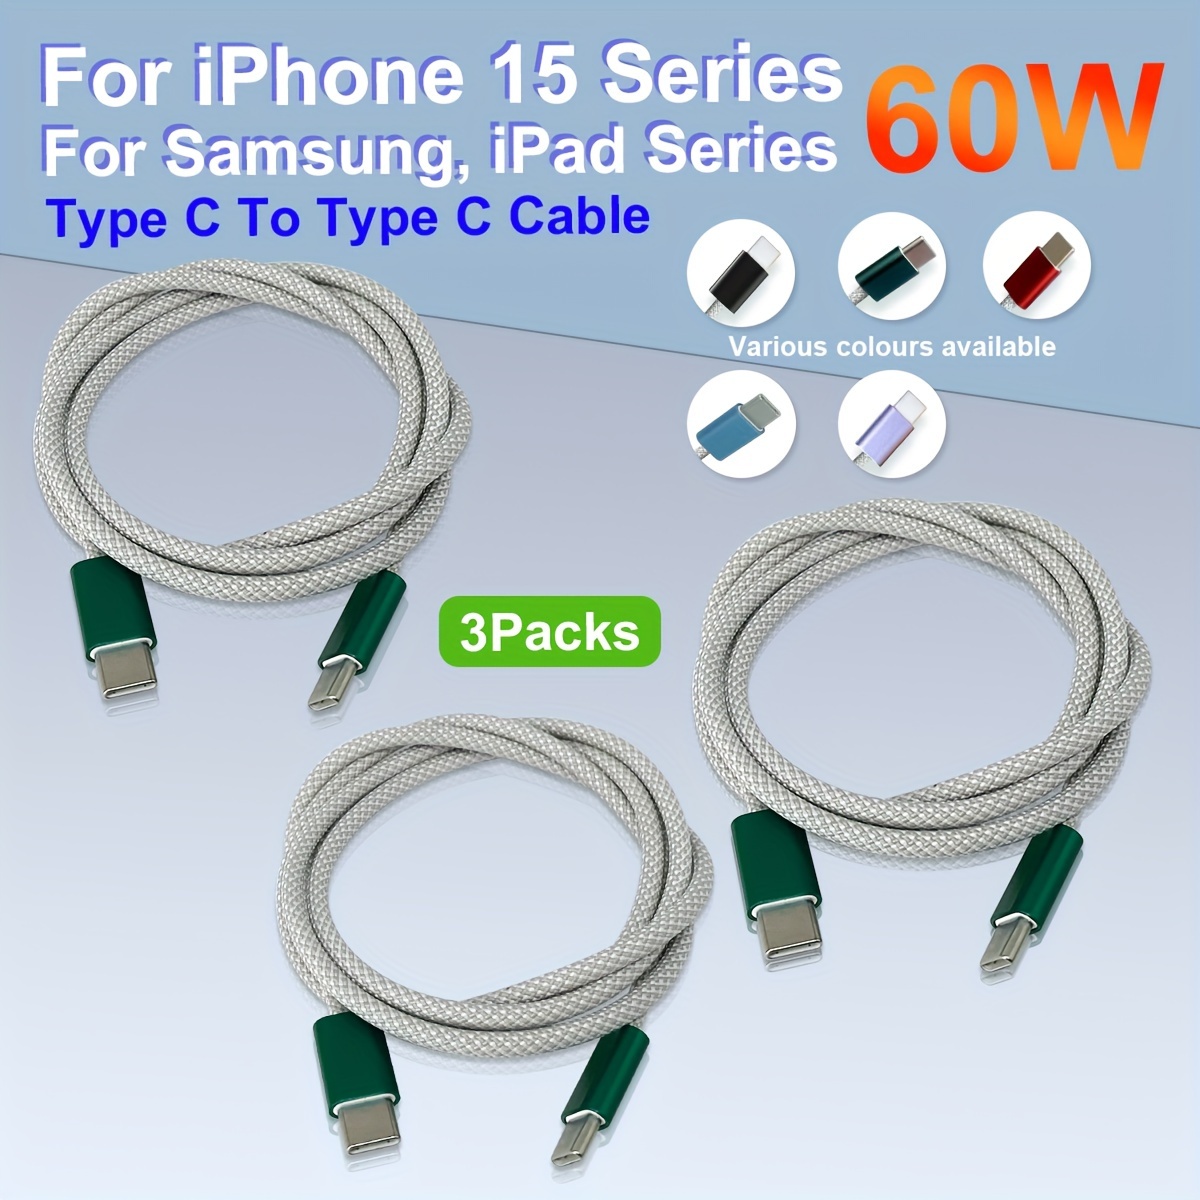 iPhone 15 Charger Cable 60W,2Pack 1+1.8M Apple USB C to USB C Fast